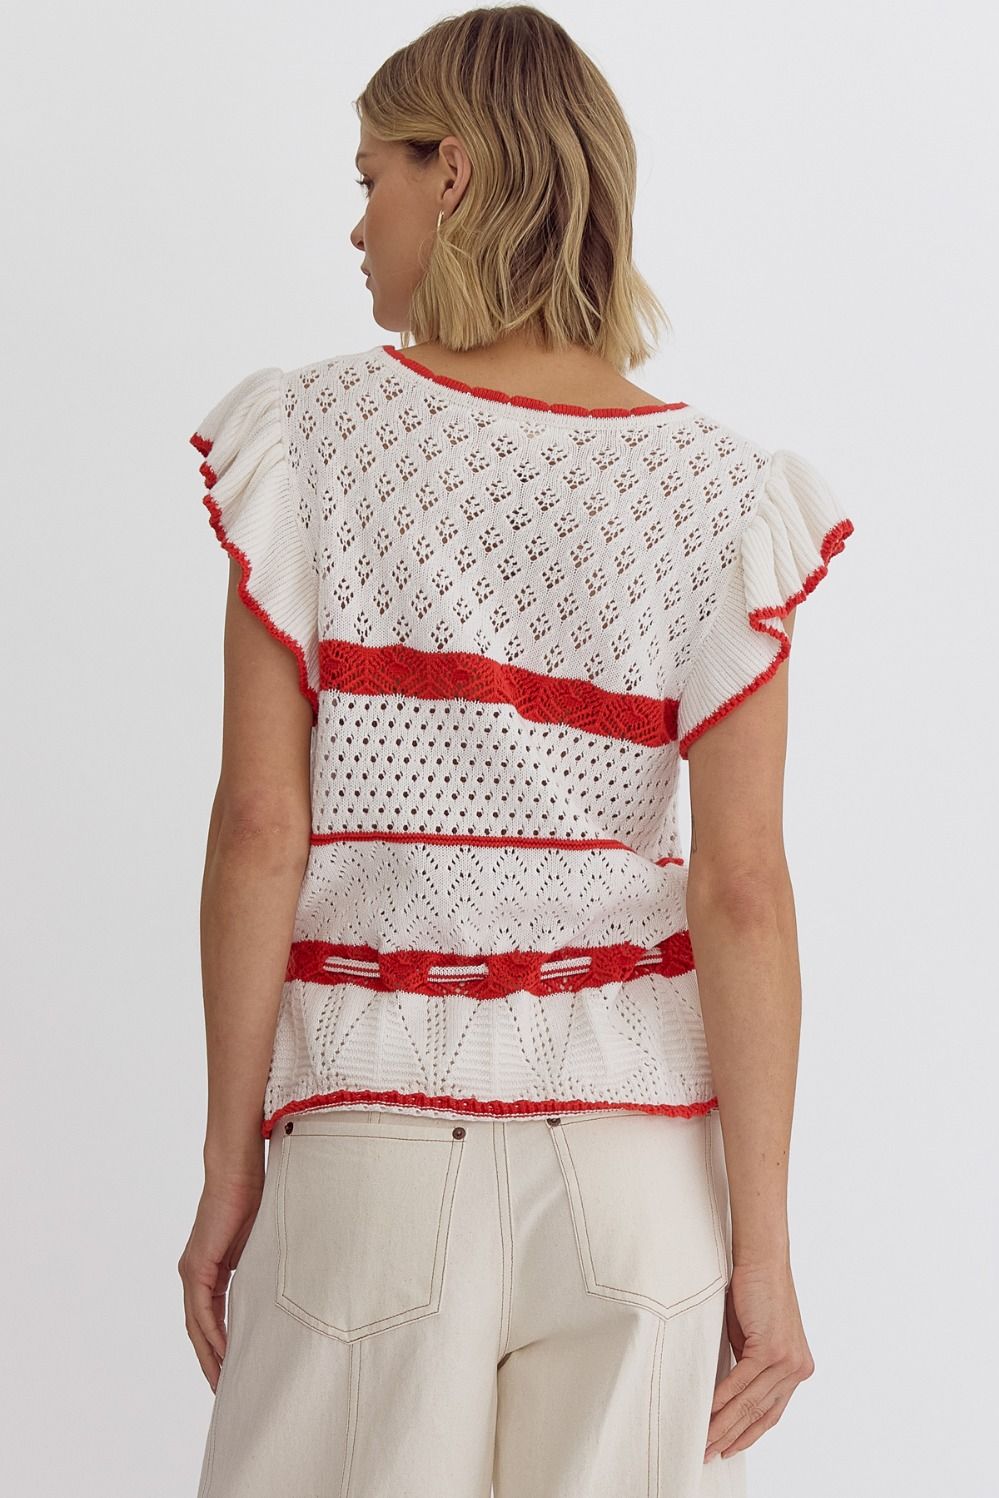 Red & White Sleeveless Knit Top